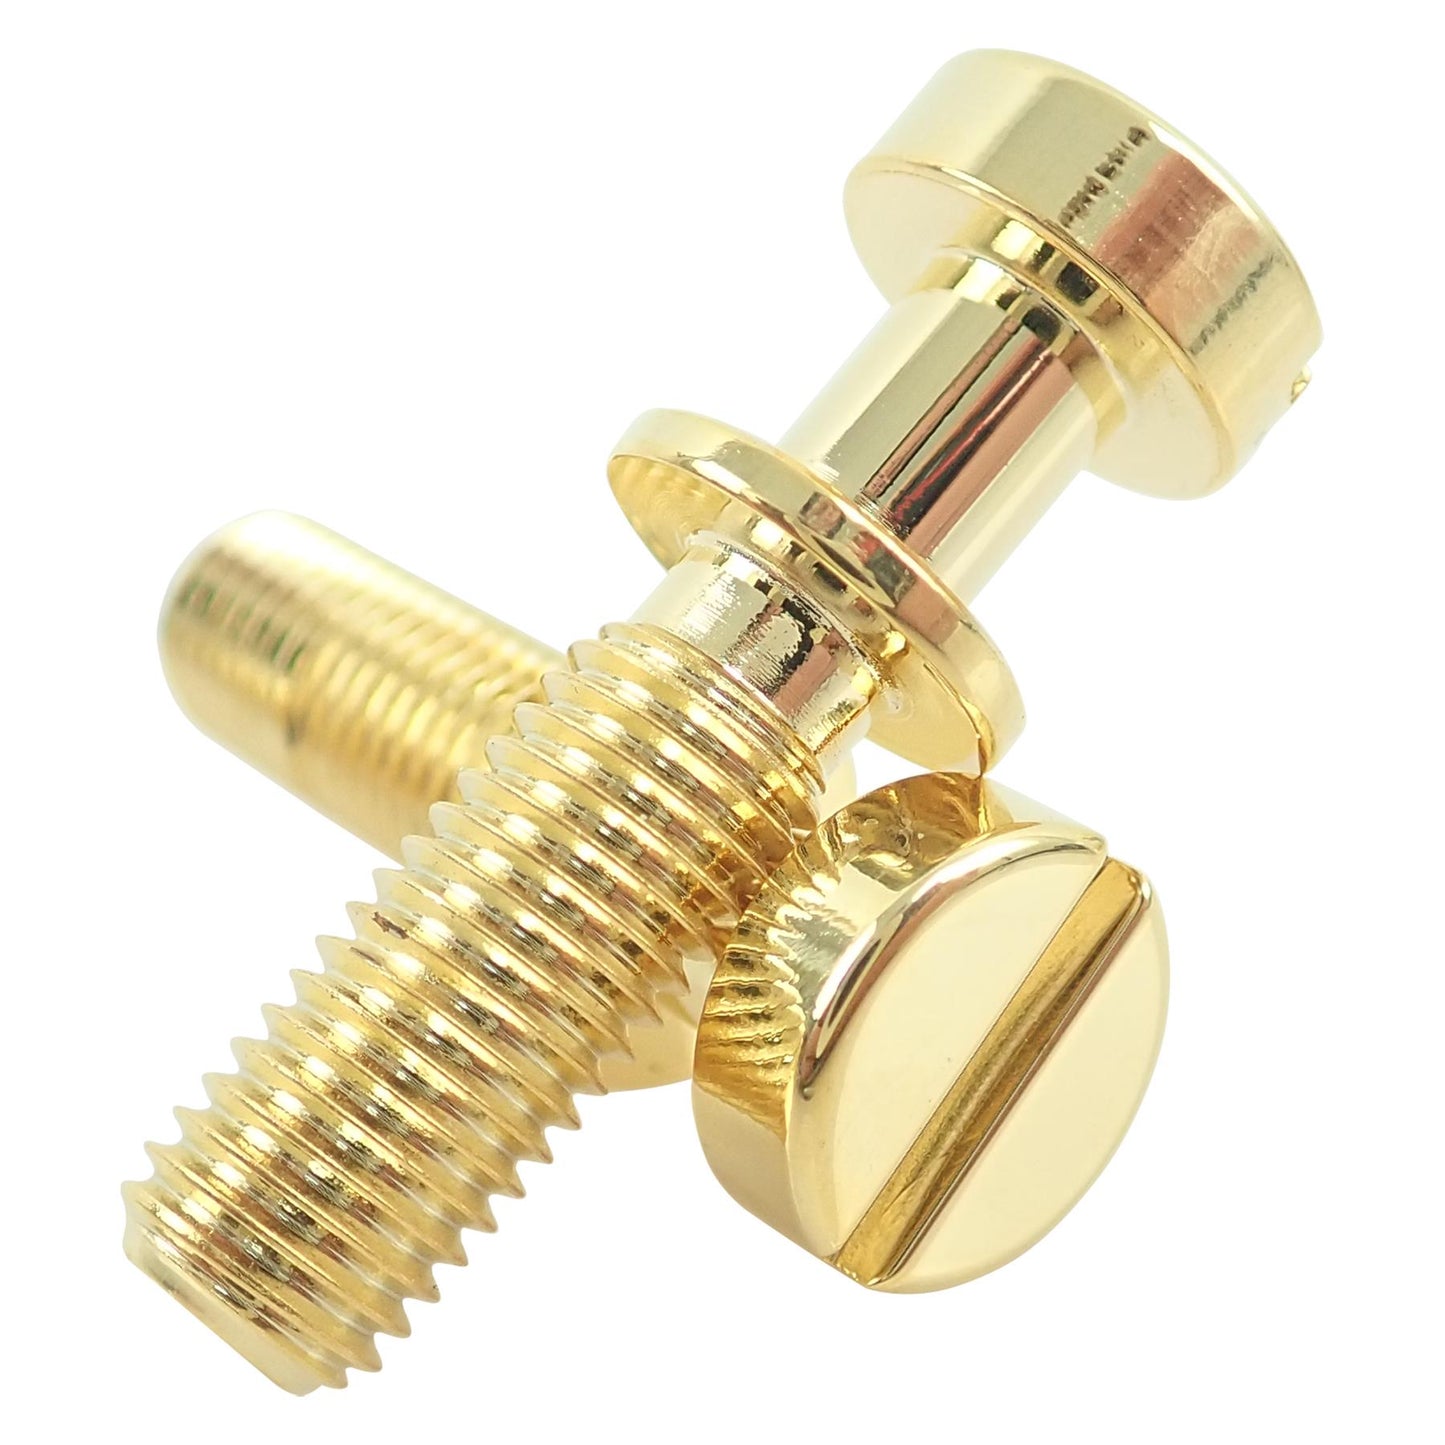 Towner Gold Replacement Us Standard Tailpiece Mounting Studs (No Anchors)